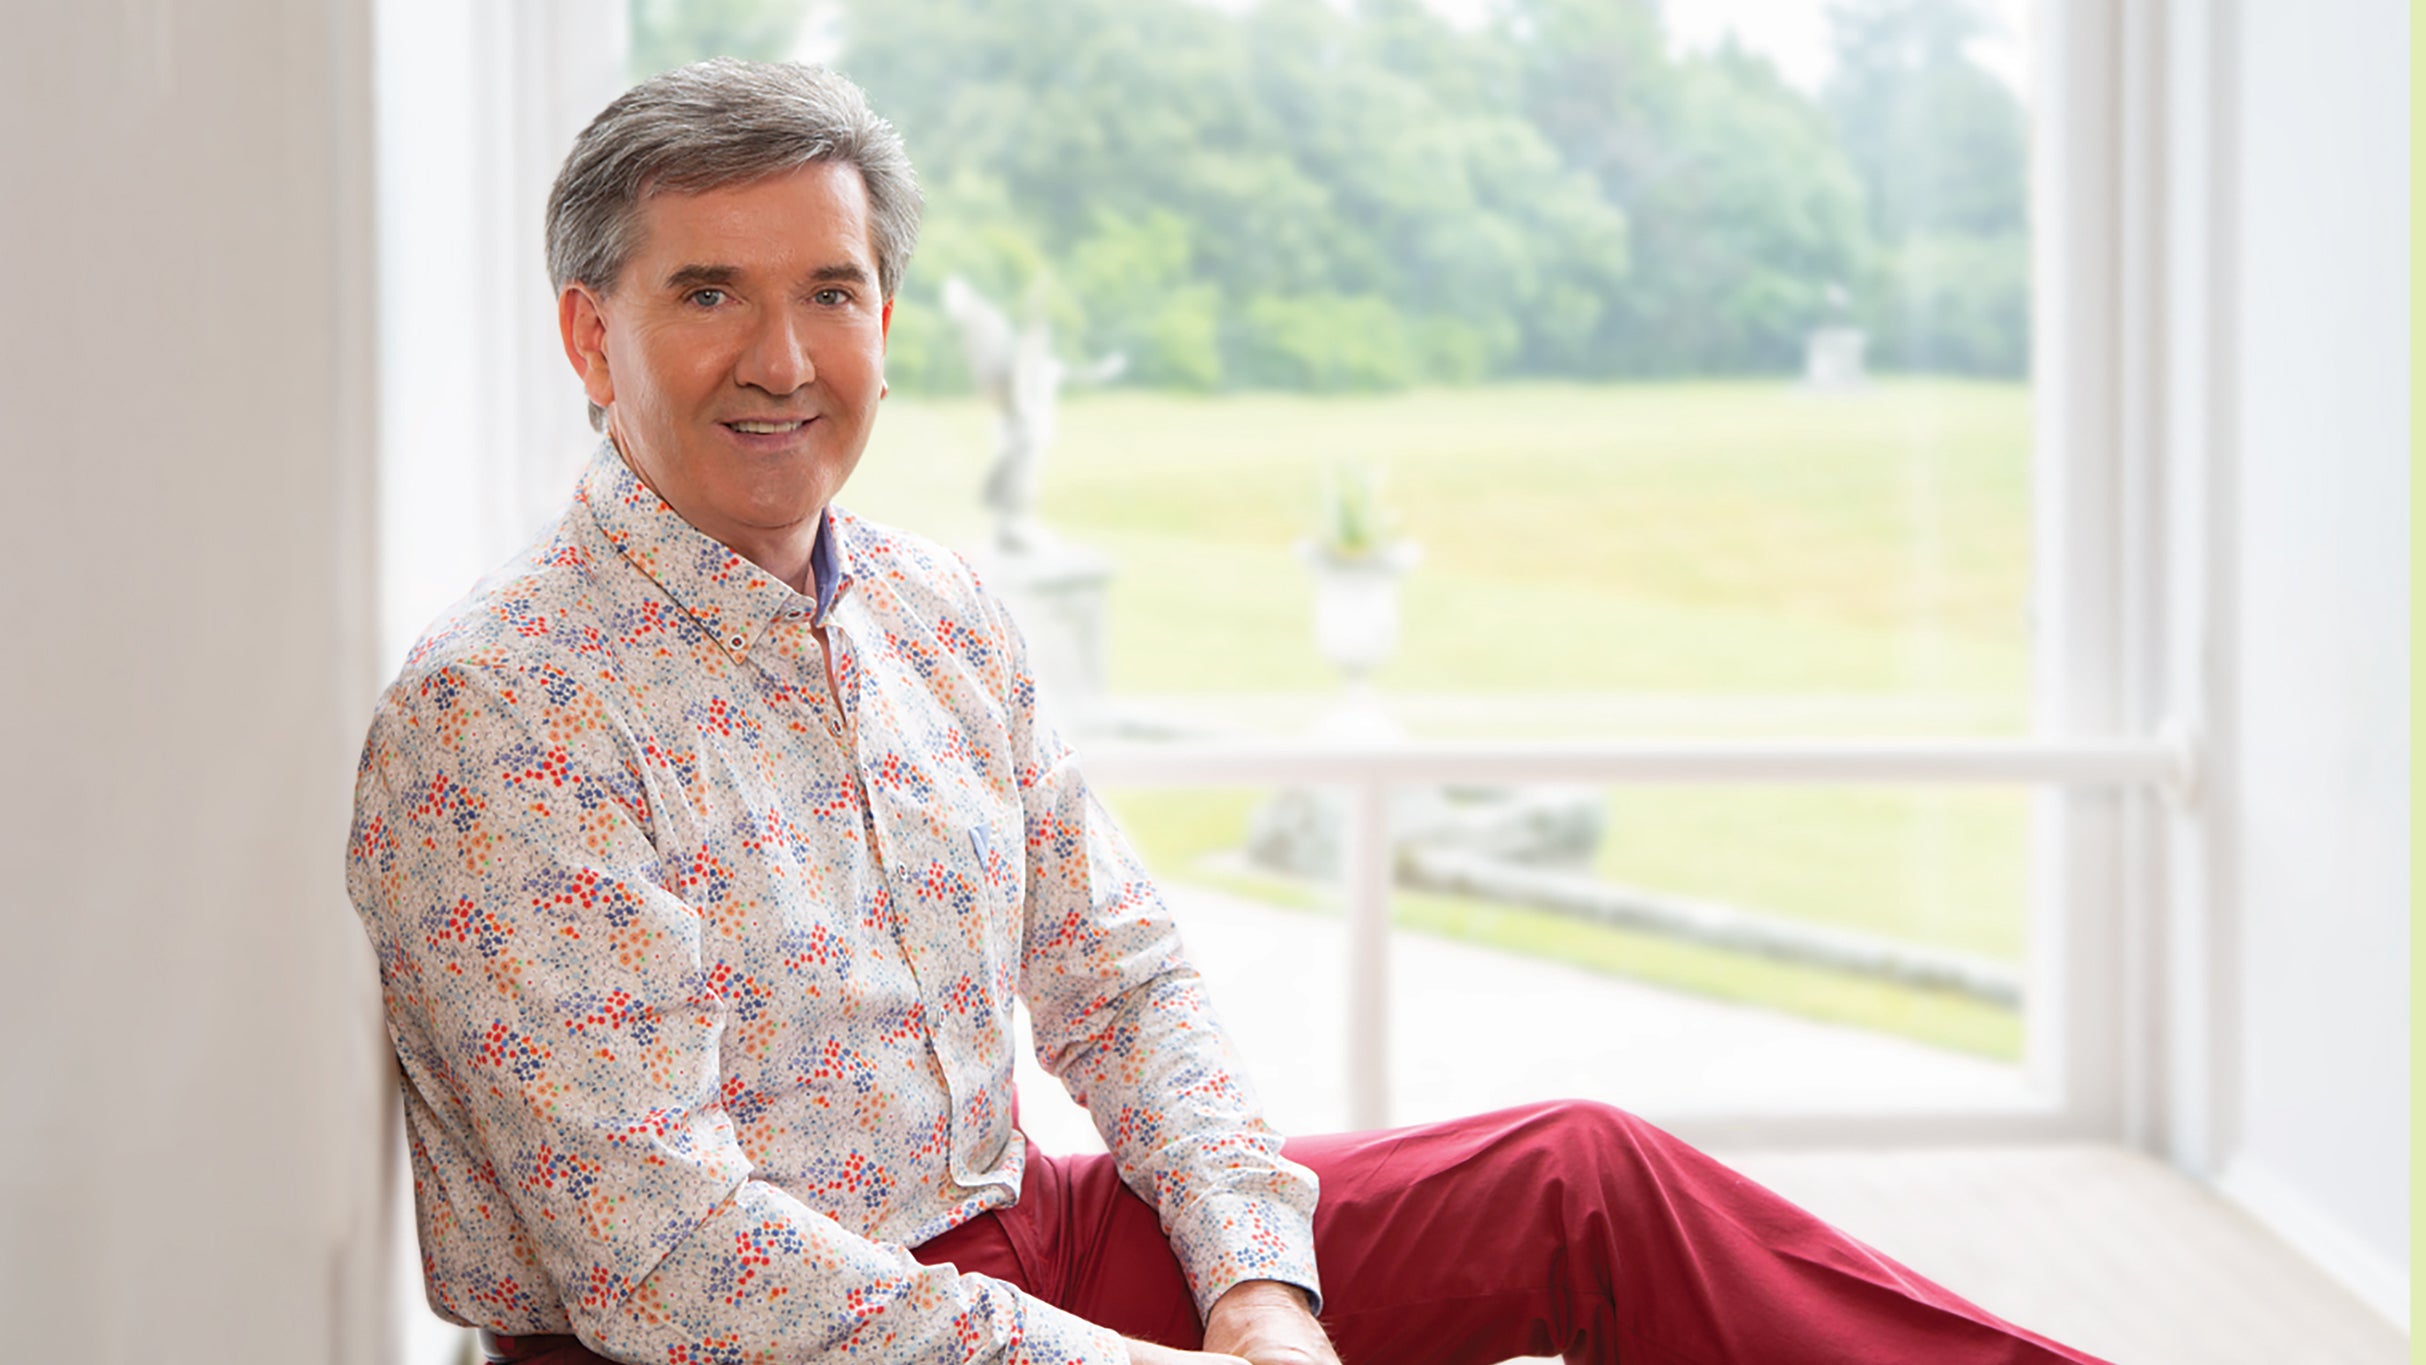 Daniel O'Donnell presale password for show tickets in Pickering, ON (The Arena at Pickering Casino Resort)